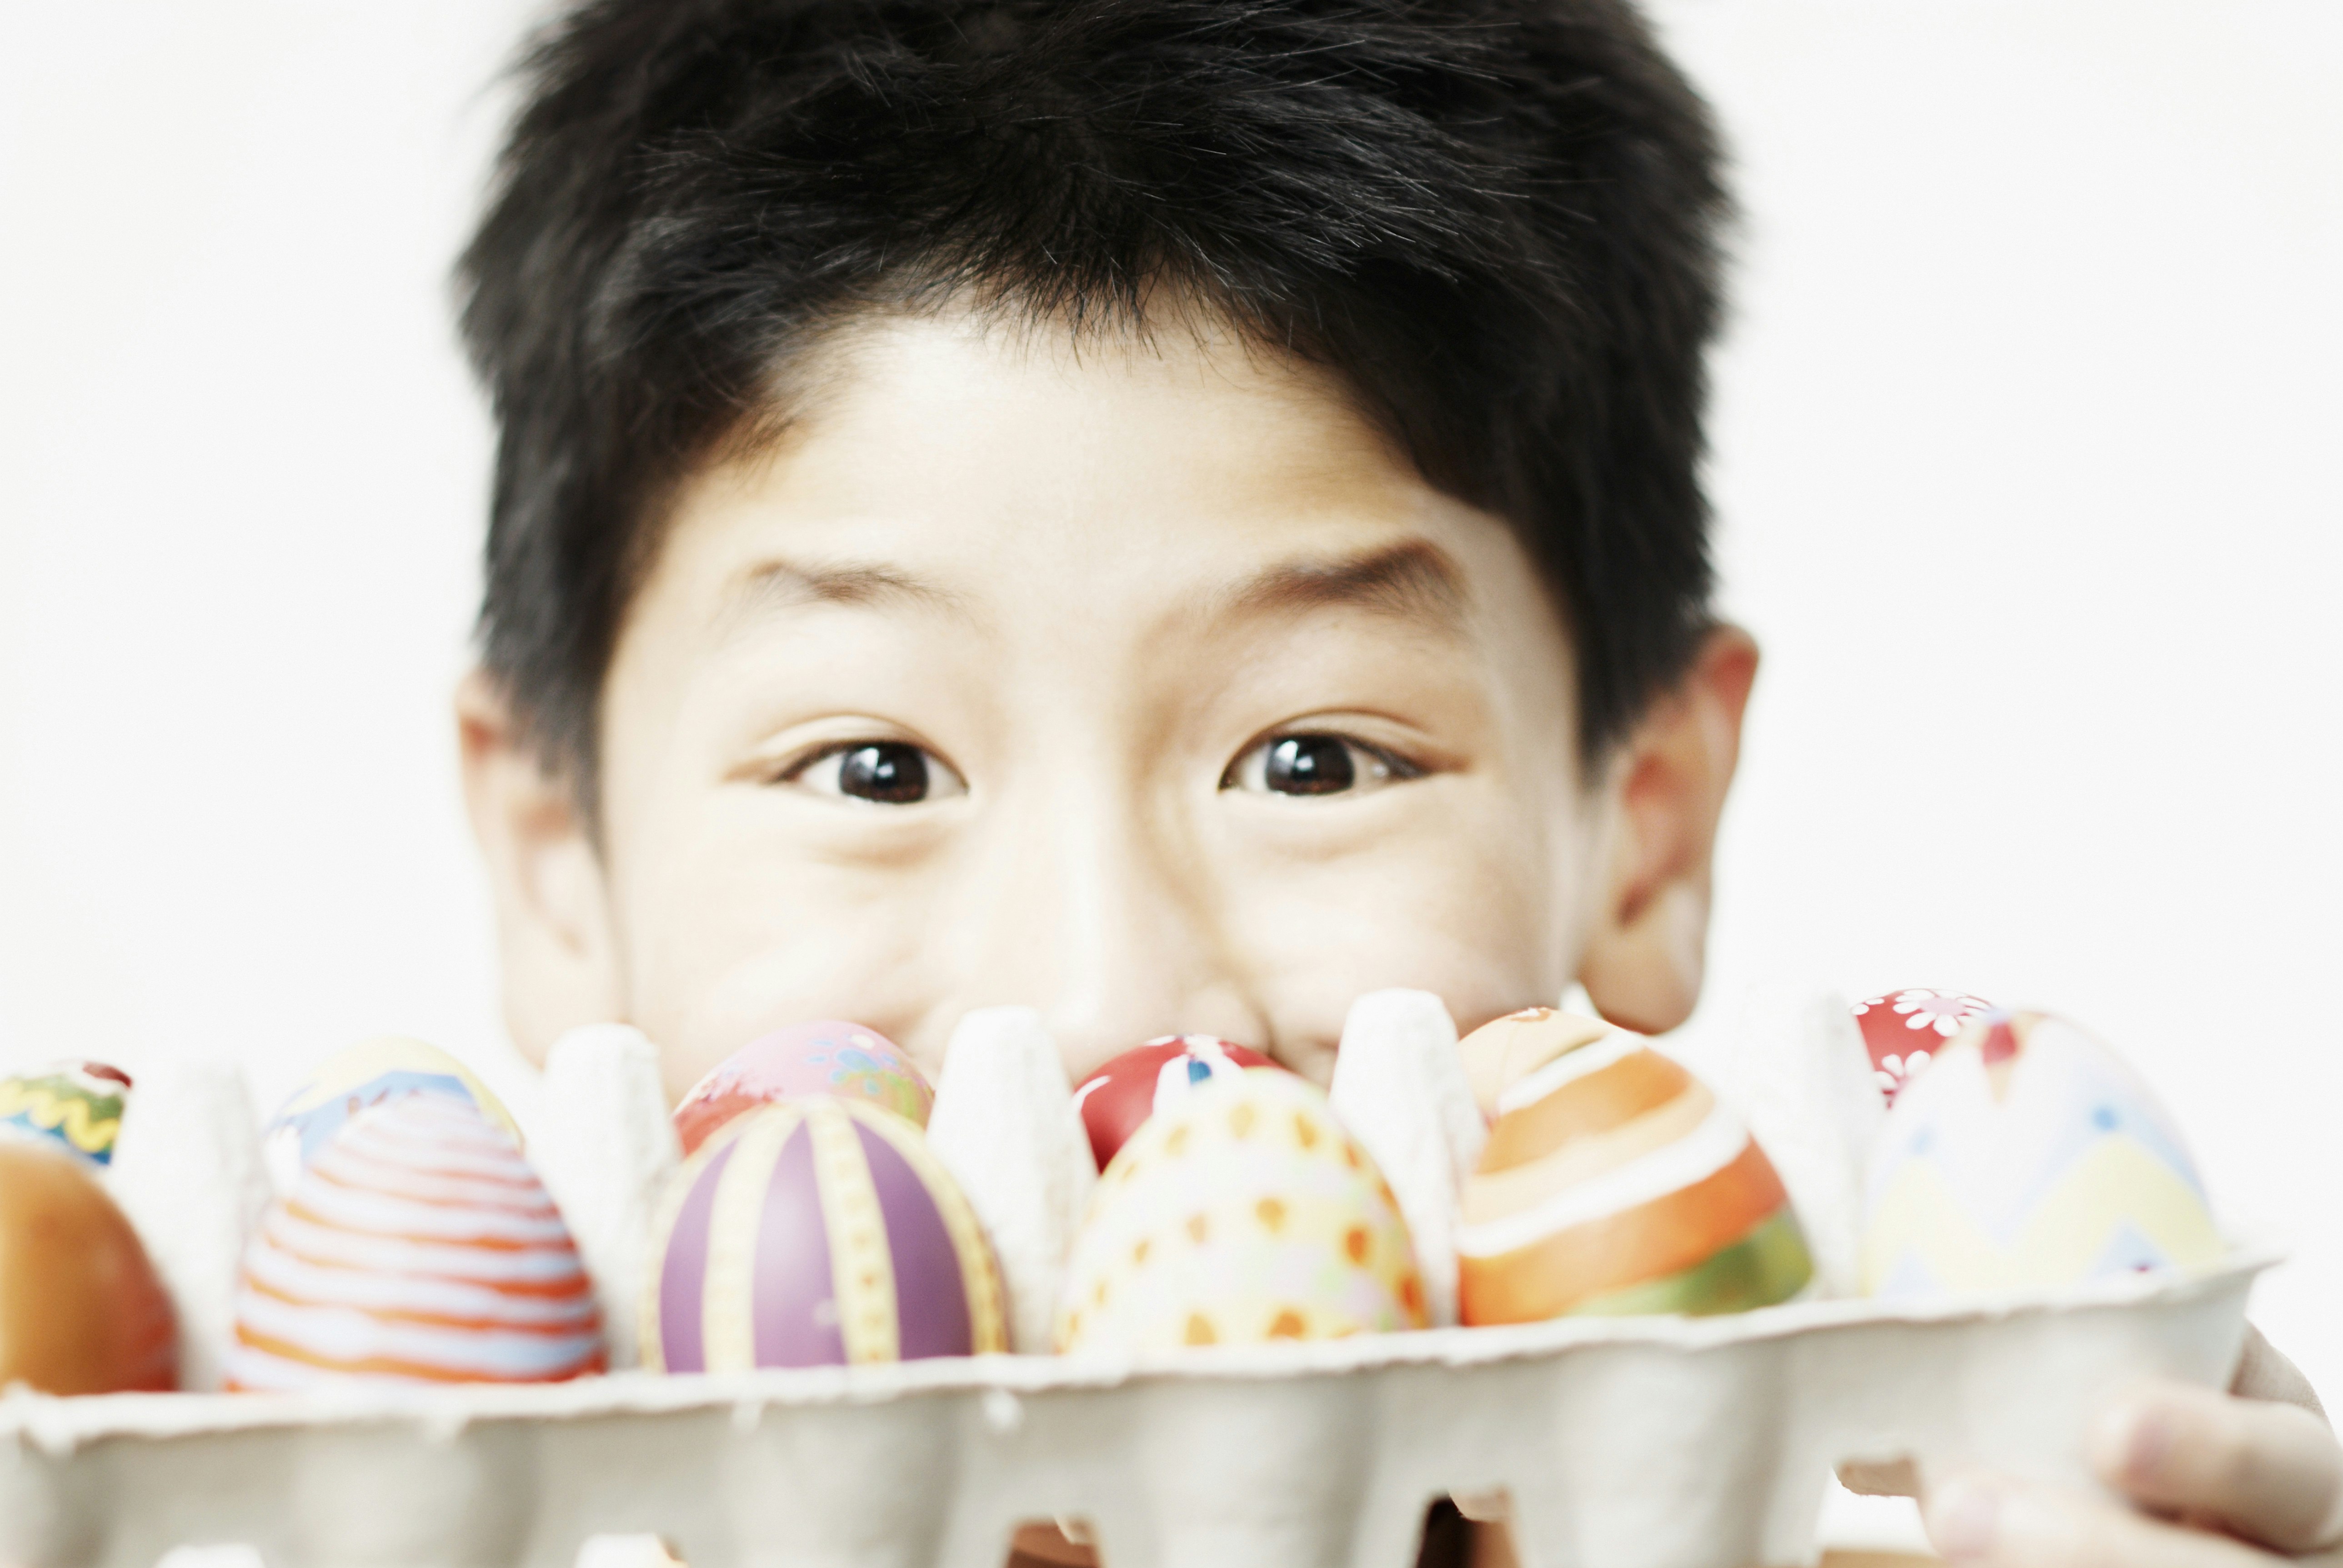 A boy looks at the camera and is half covered by a box of handpainted eggs.